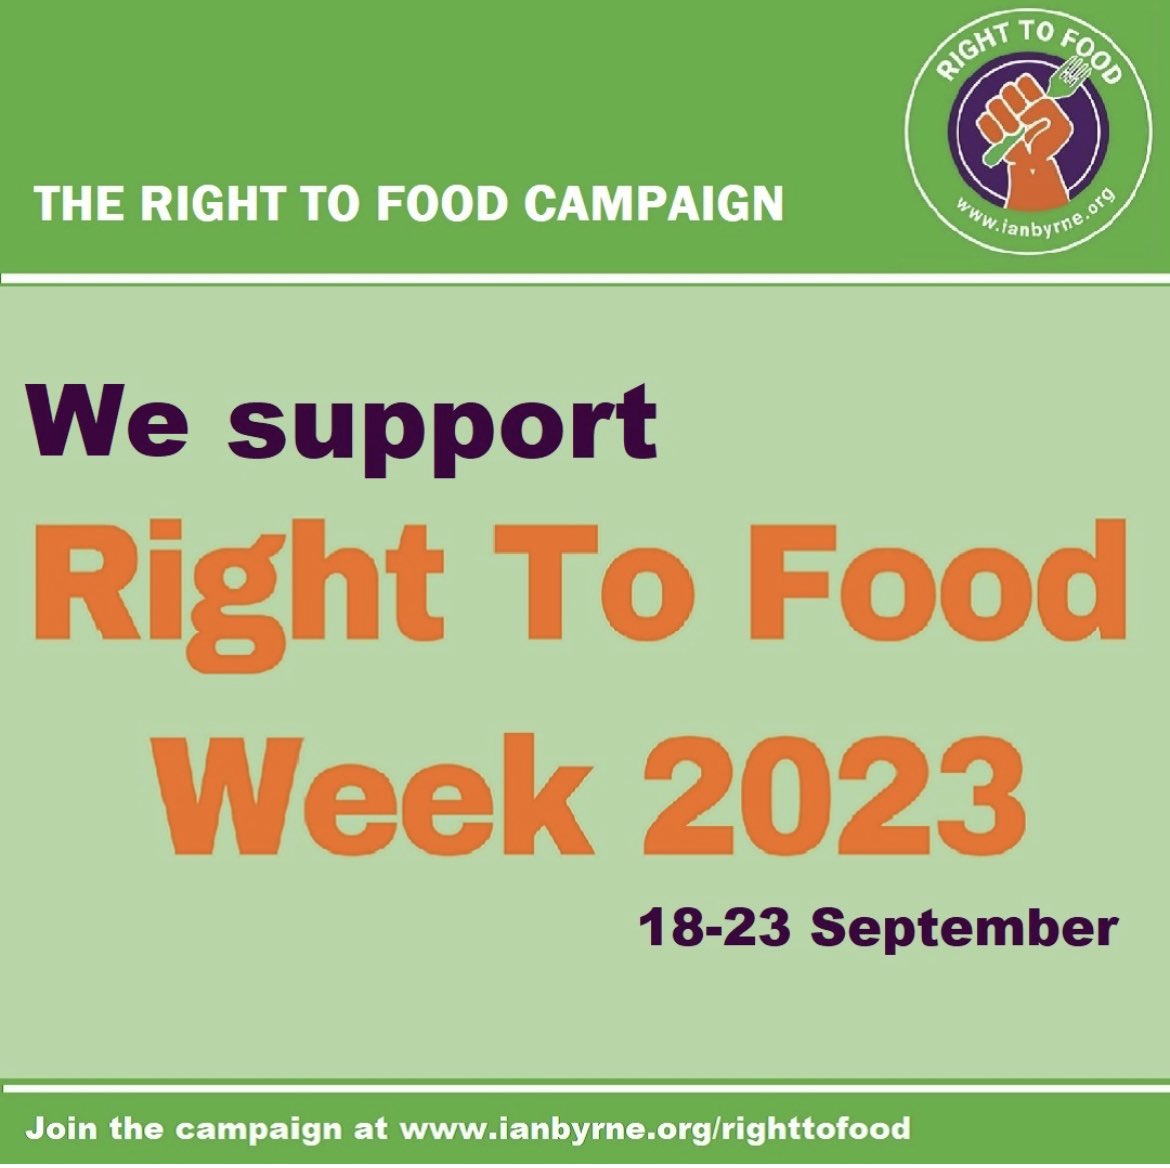 I’ll be Supporting this extremely important and much needed campaign on Saturday with my family in support of #RightToFood #RTFWeek2023 #HungerMarchLiverpool @IanByrneMP 👌🙌❤️ @SFoodbanks @LFCFoundation @LFC words are cheap sometimes but taking ACTION can make the difference!